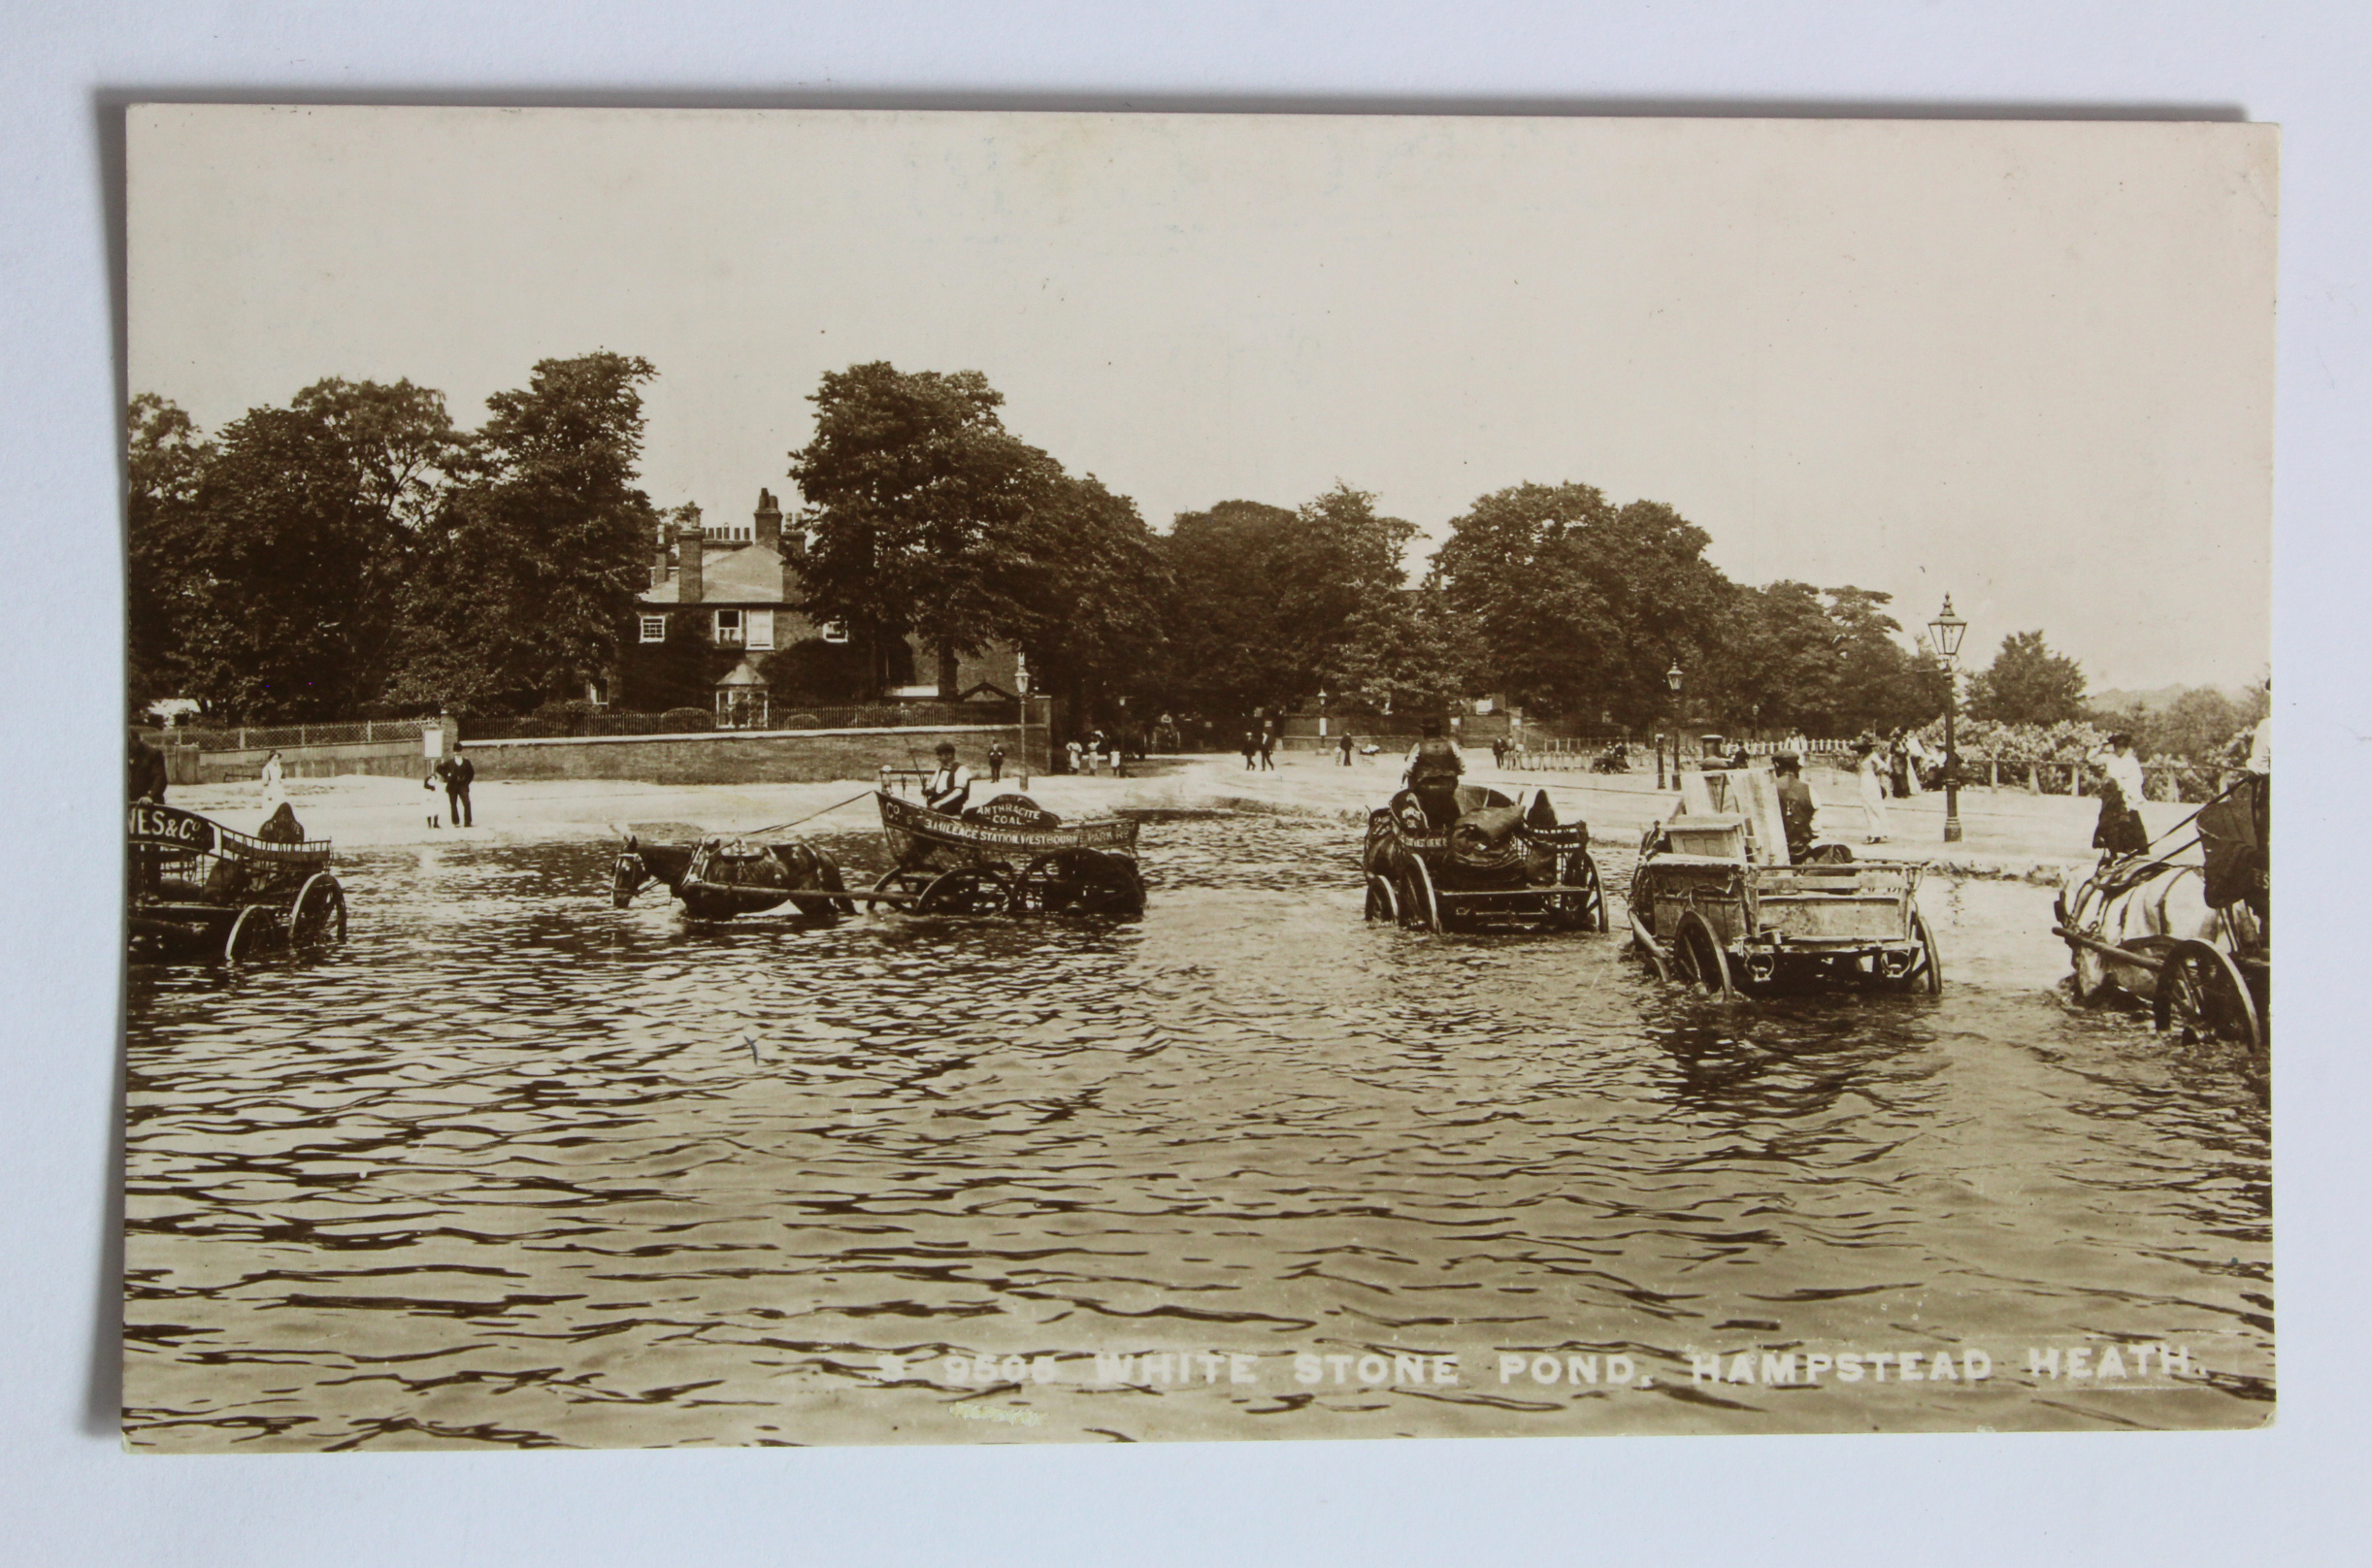 Hampstead Heath White Stone pond with horse drawn delivery vehicles in pond  R/P   (1)